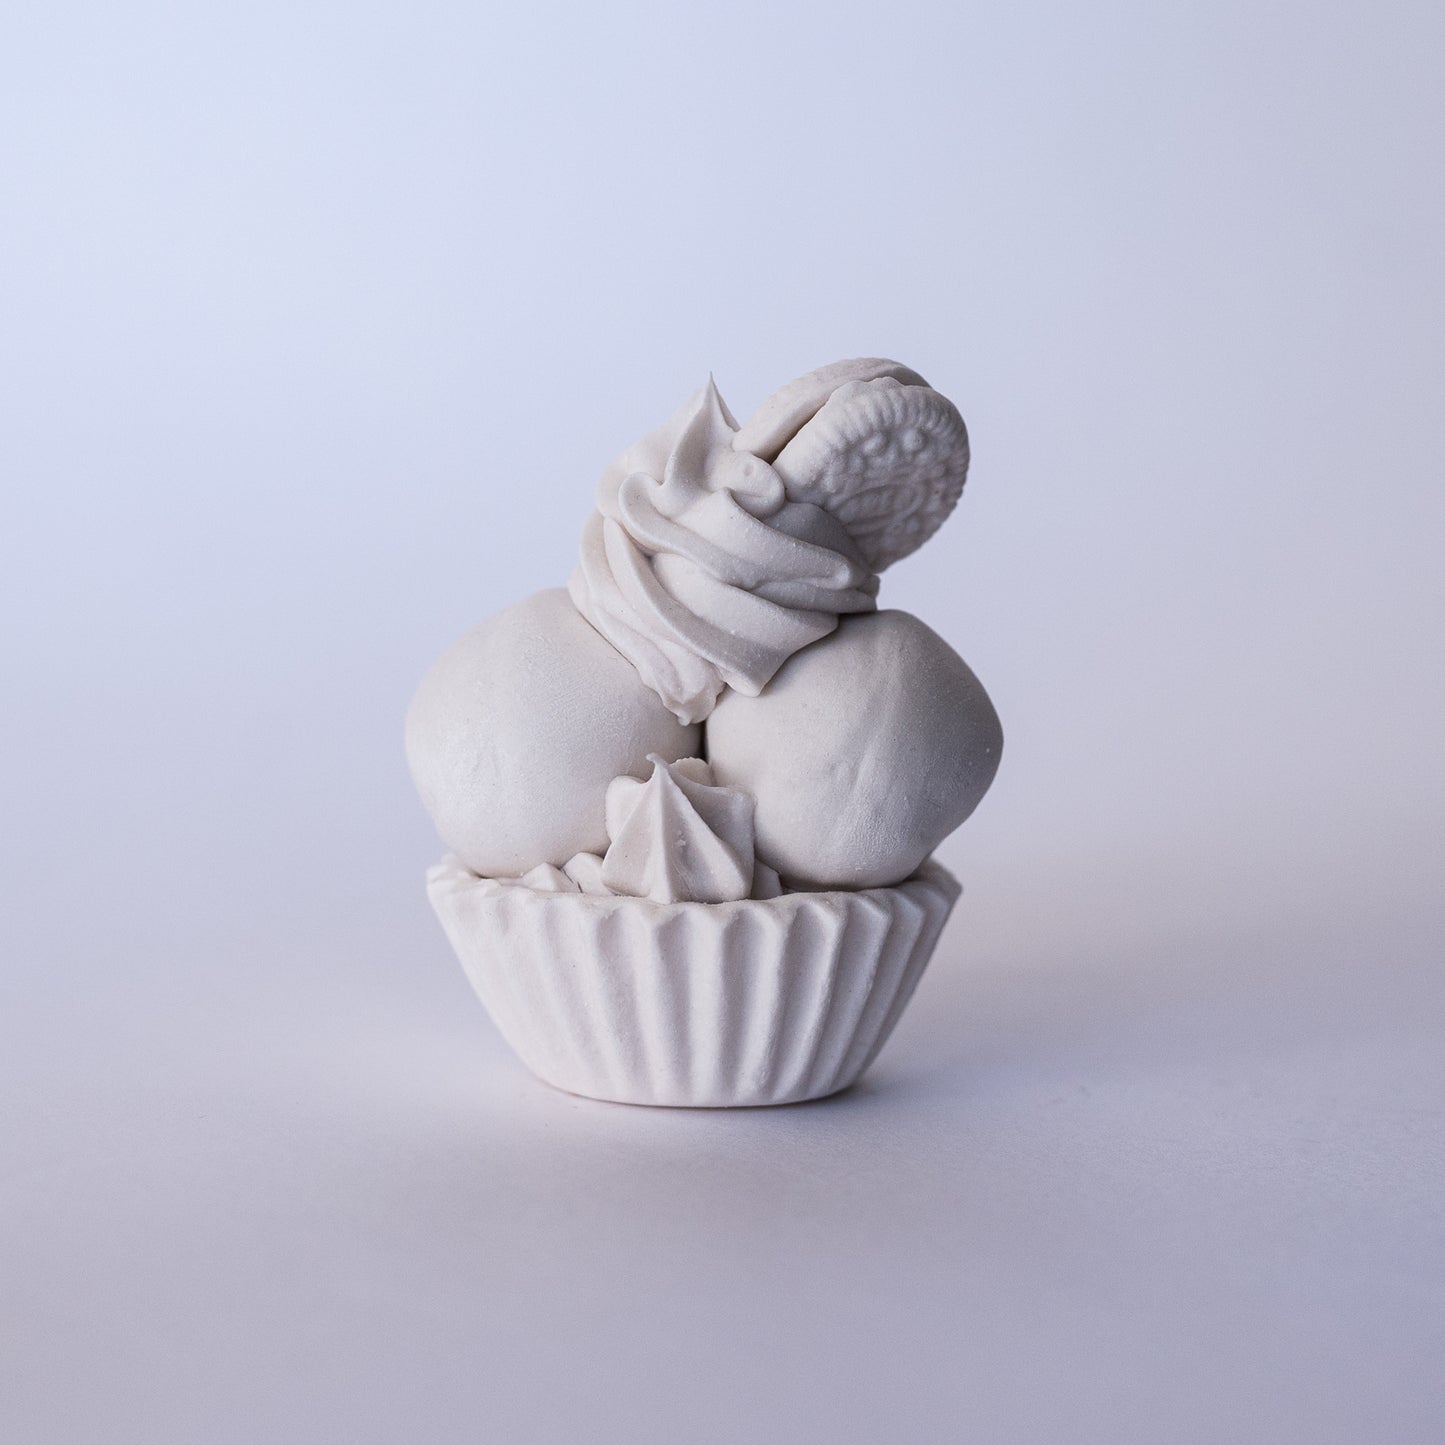 Twin Cupcake with Cookie (Limited Edition Porcelain Sculpture)